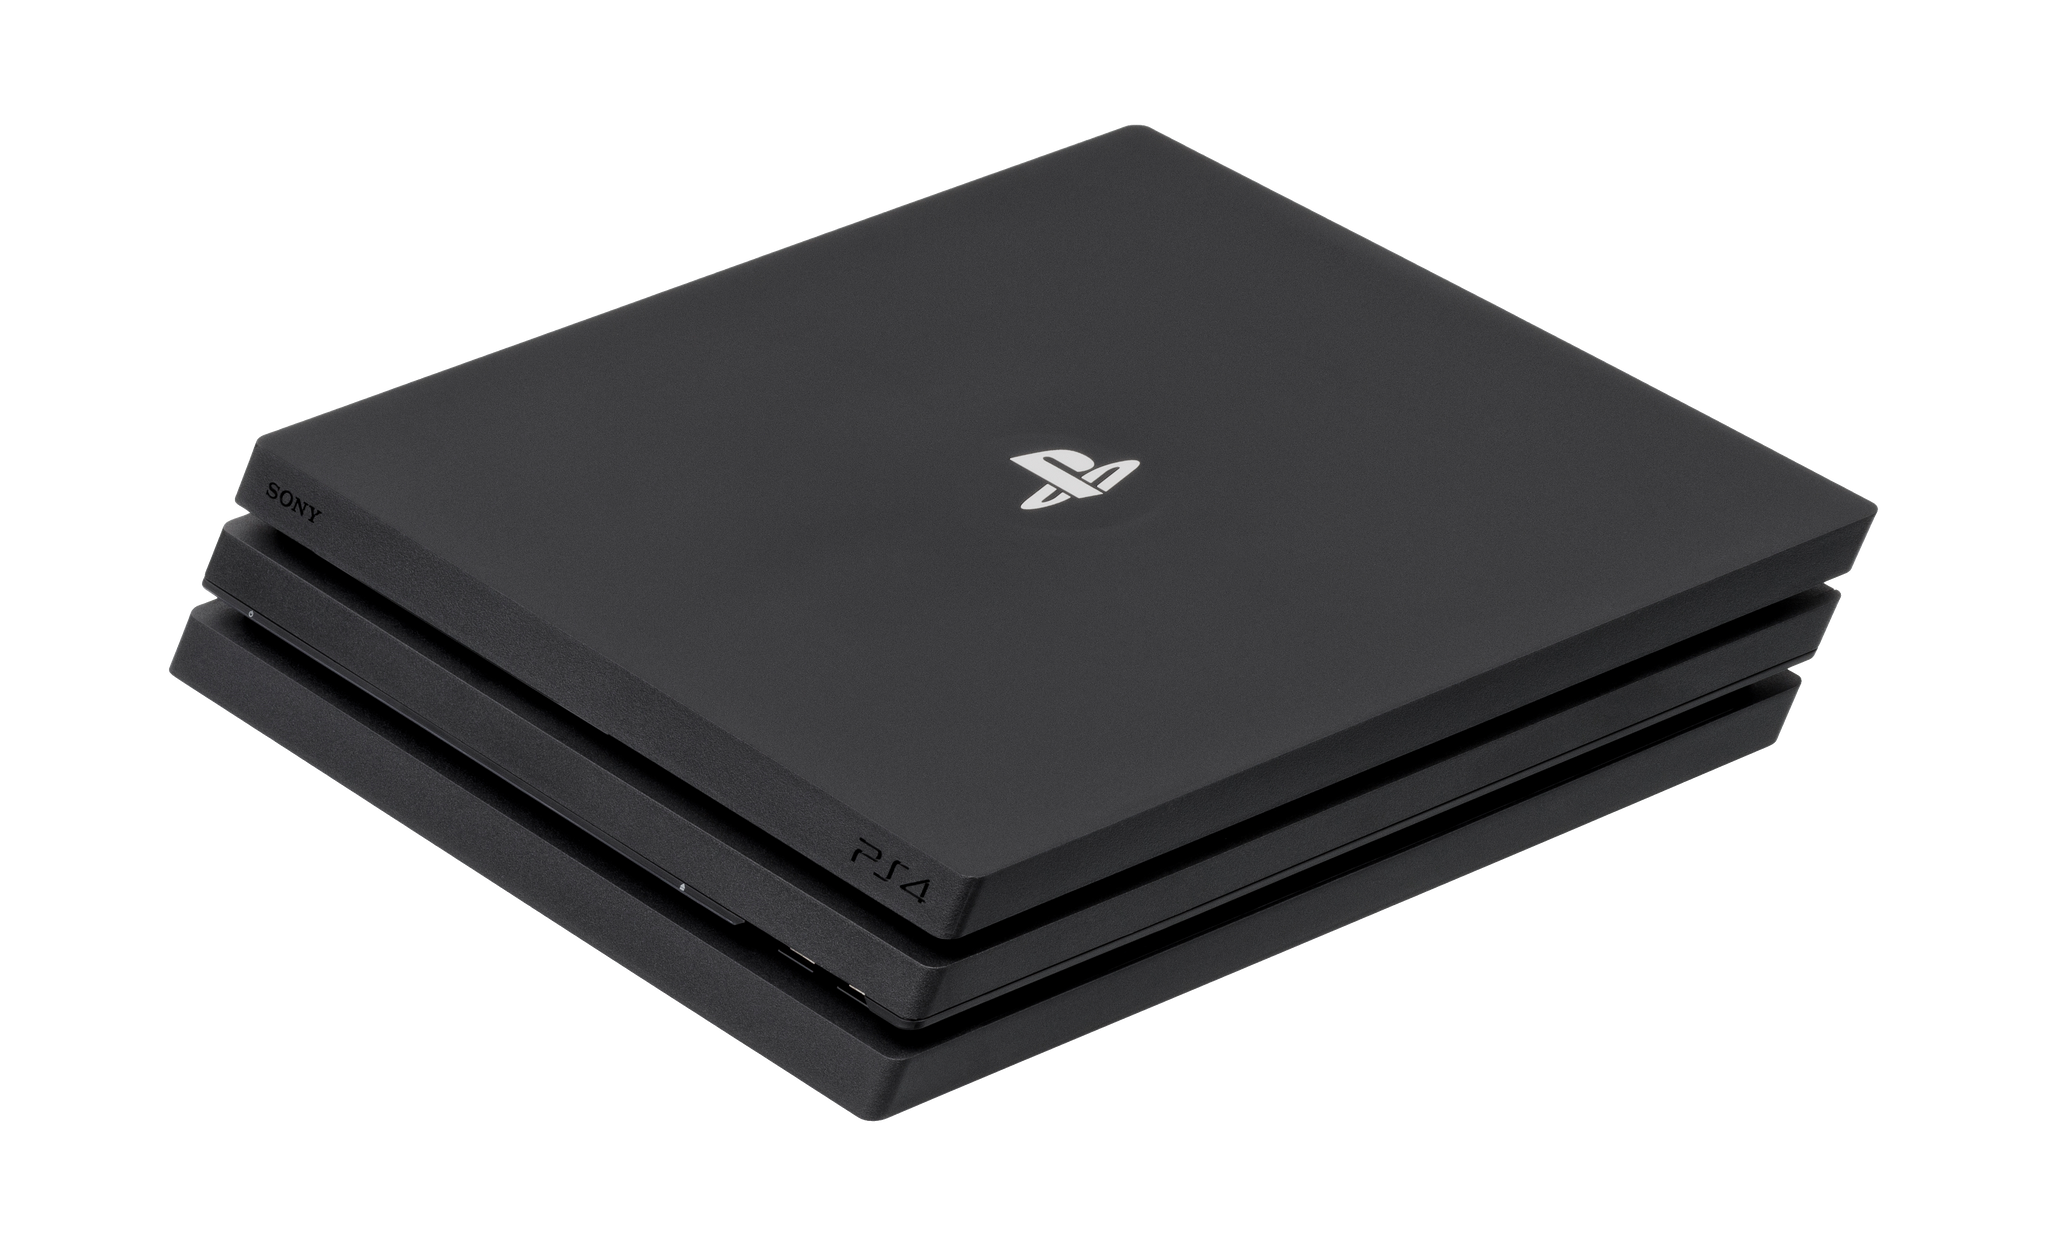 PS4 pro console pictured lying vertically. Photo by Evan Amos, wikimedia commons.